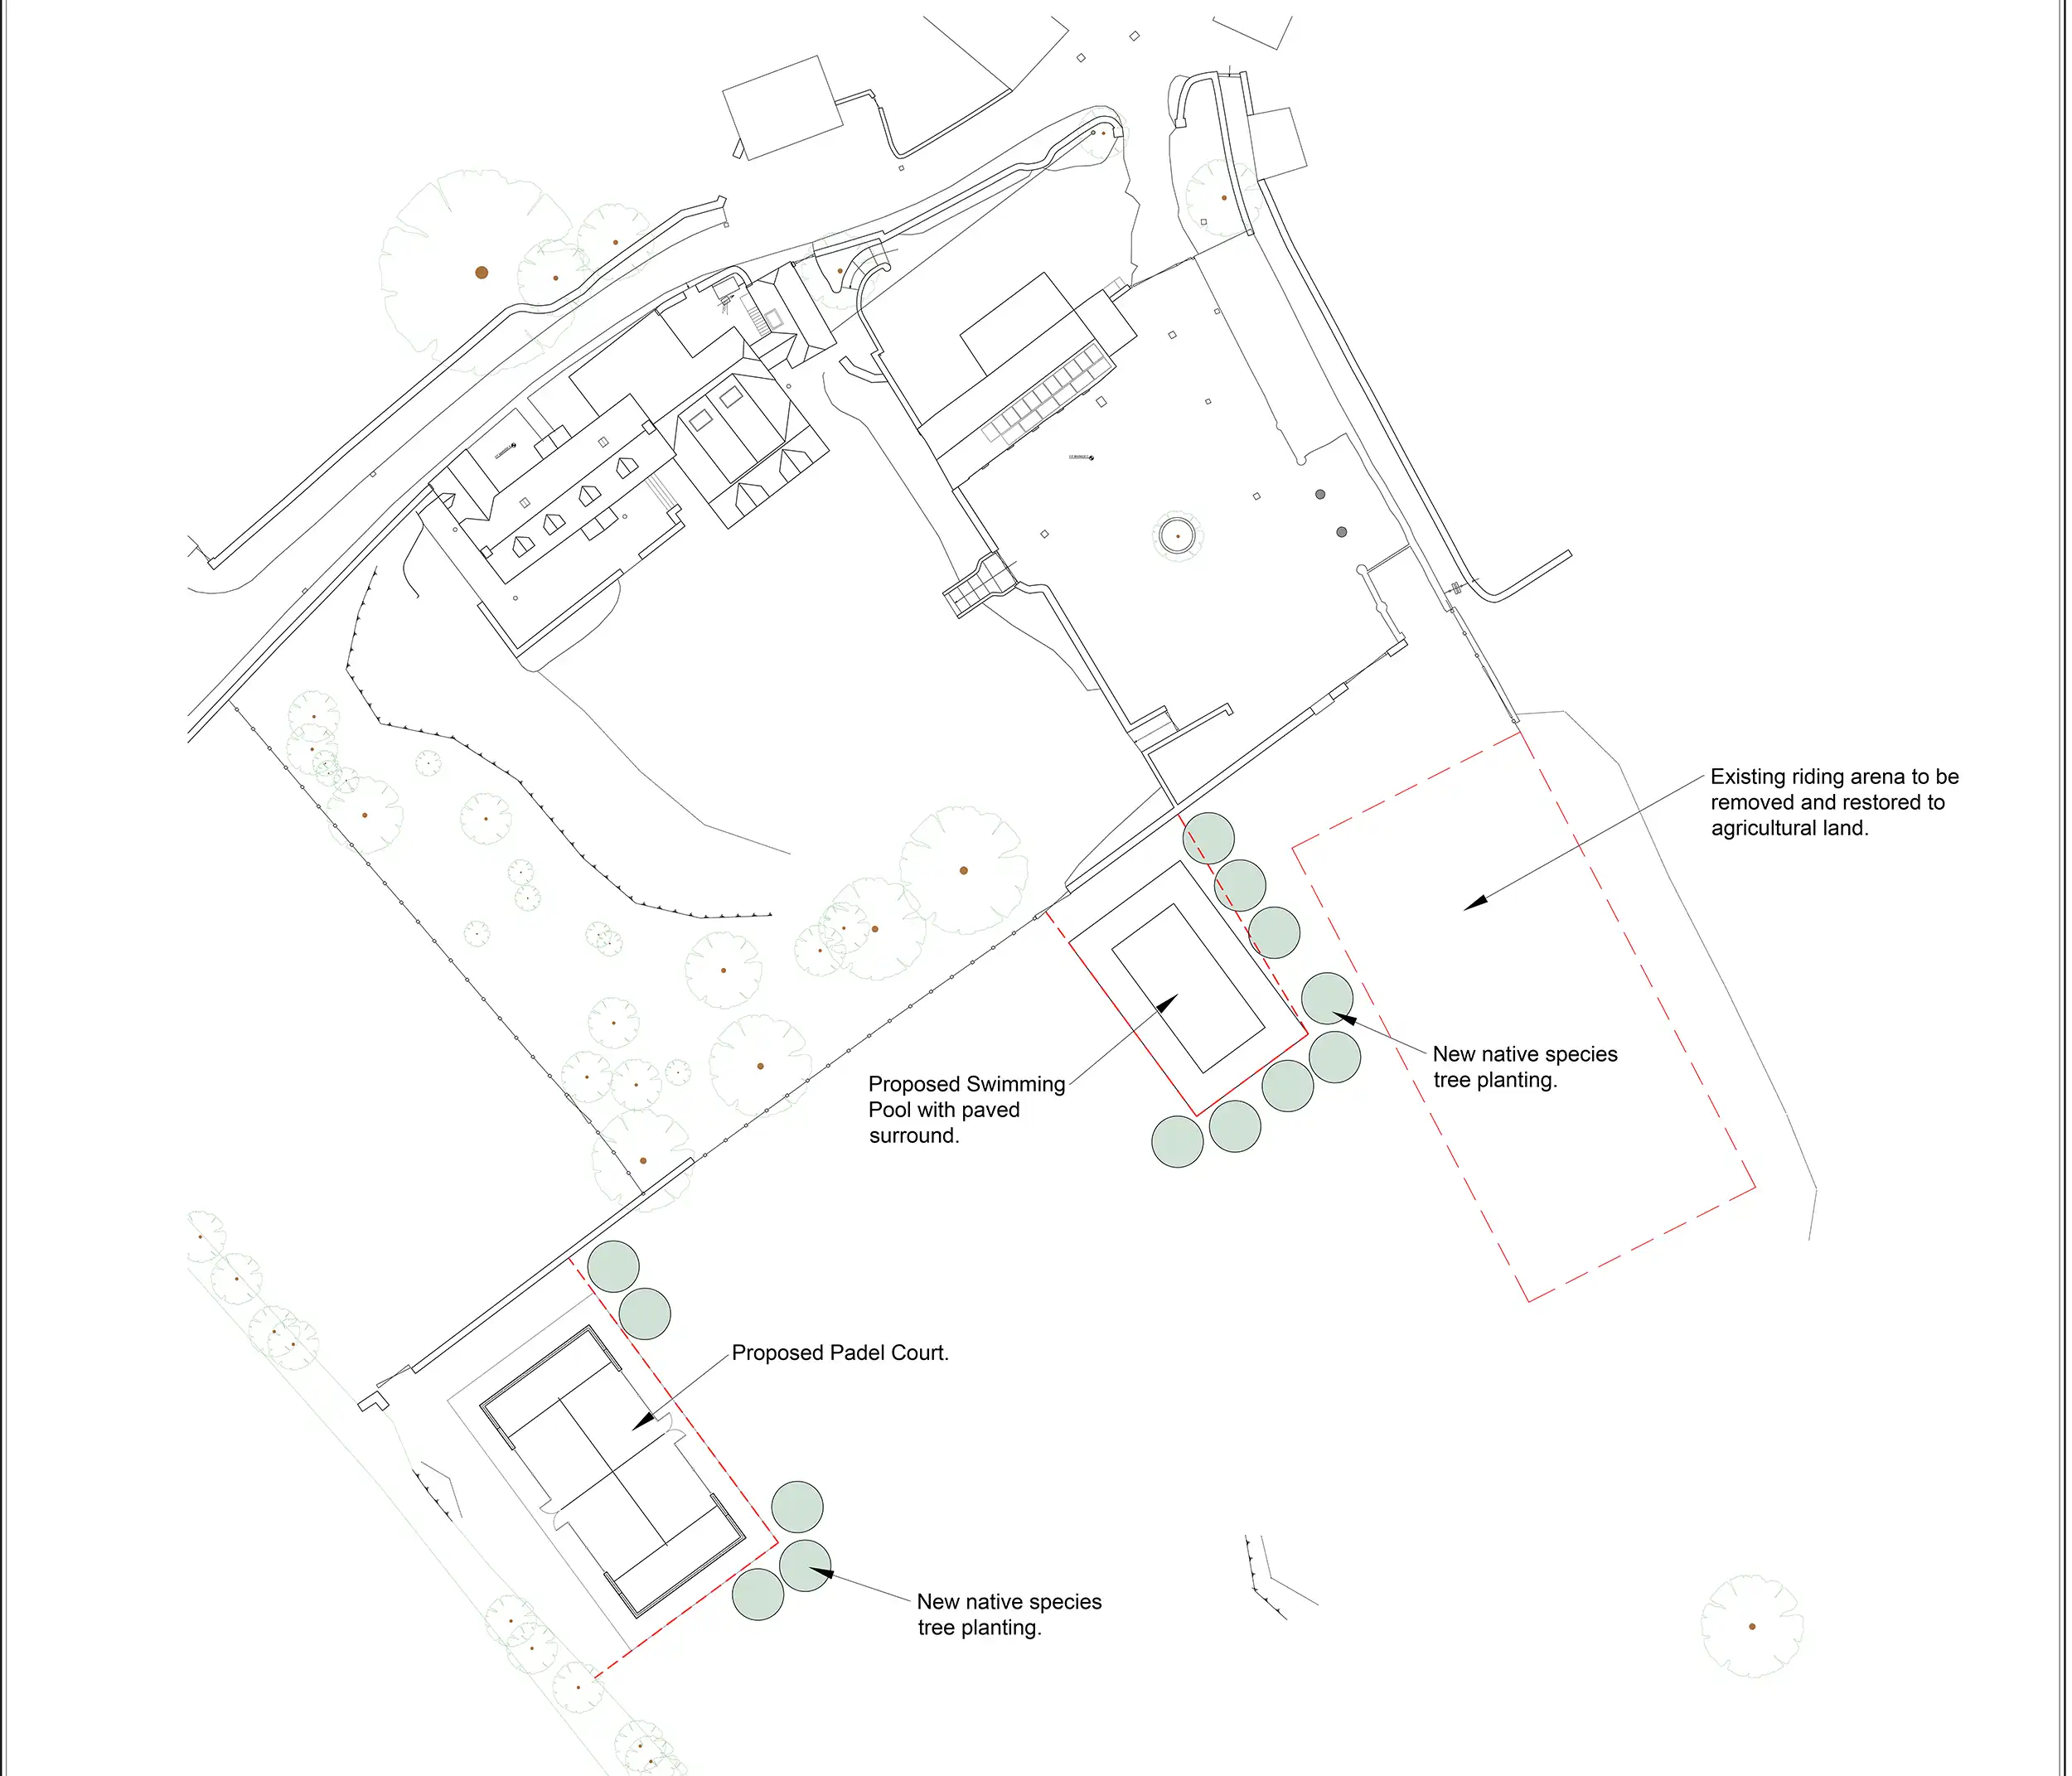 A guide to how the pool and padel court could be laid out. Picture: Brimble Lea/Somerset Council